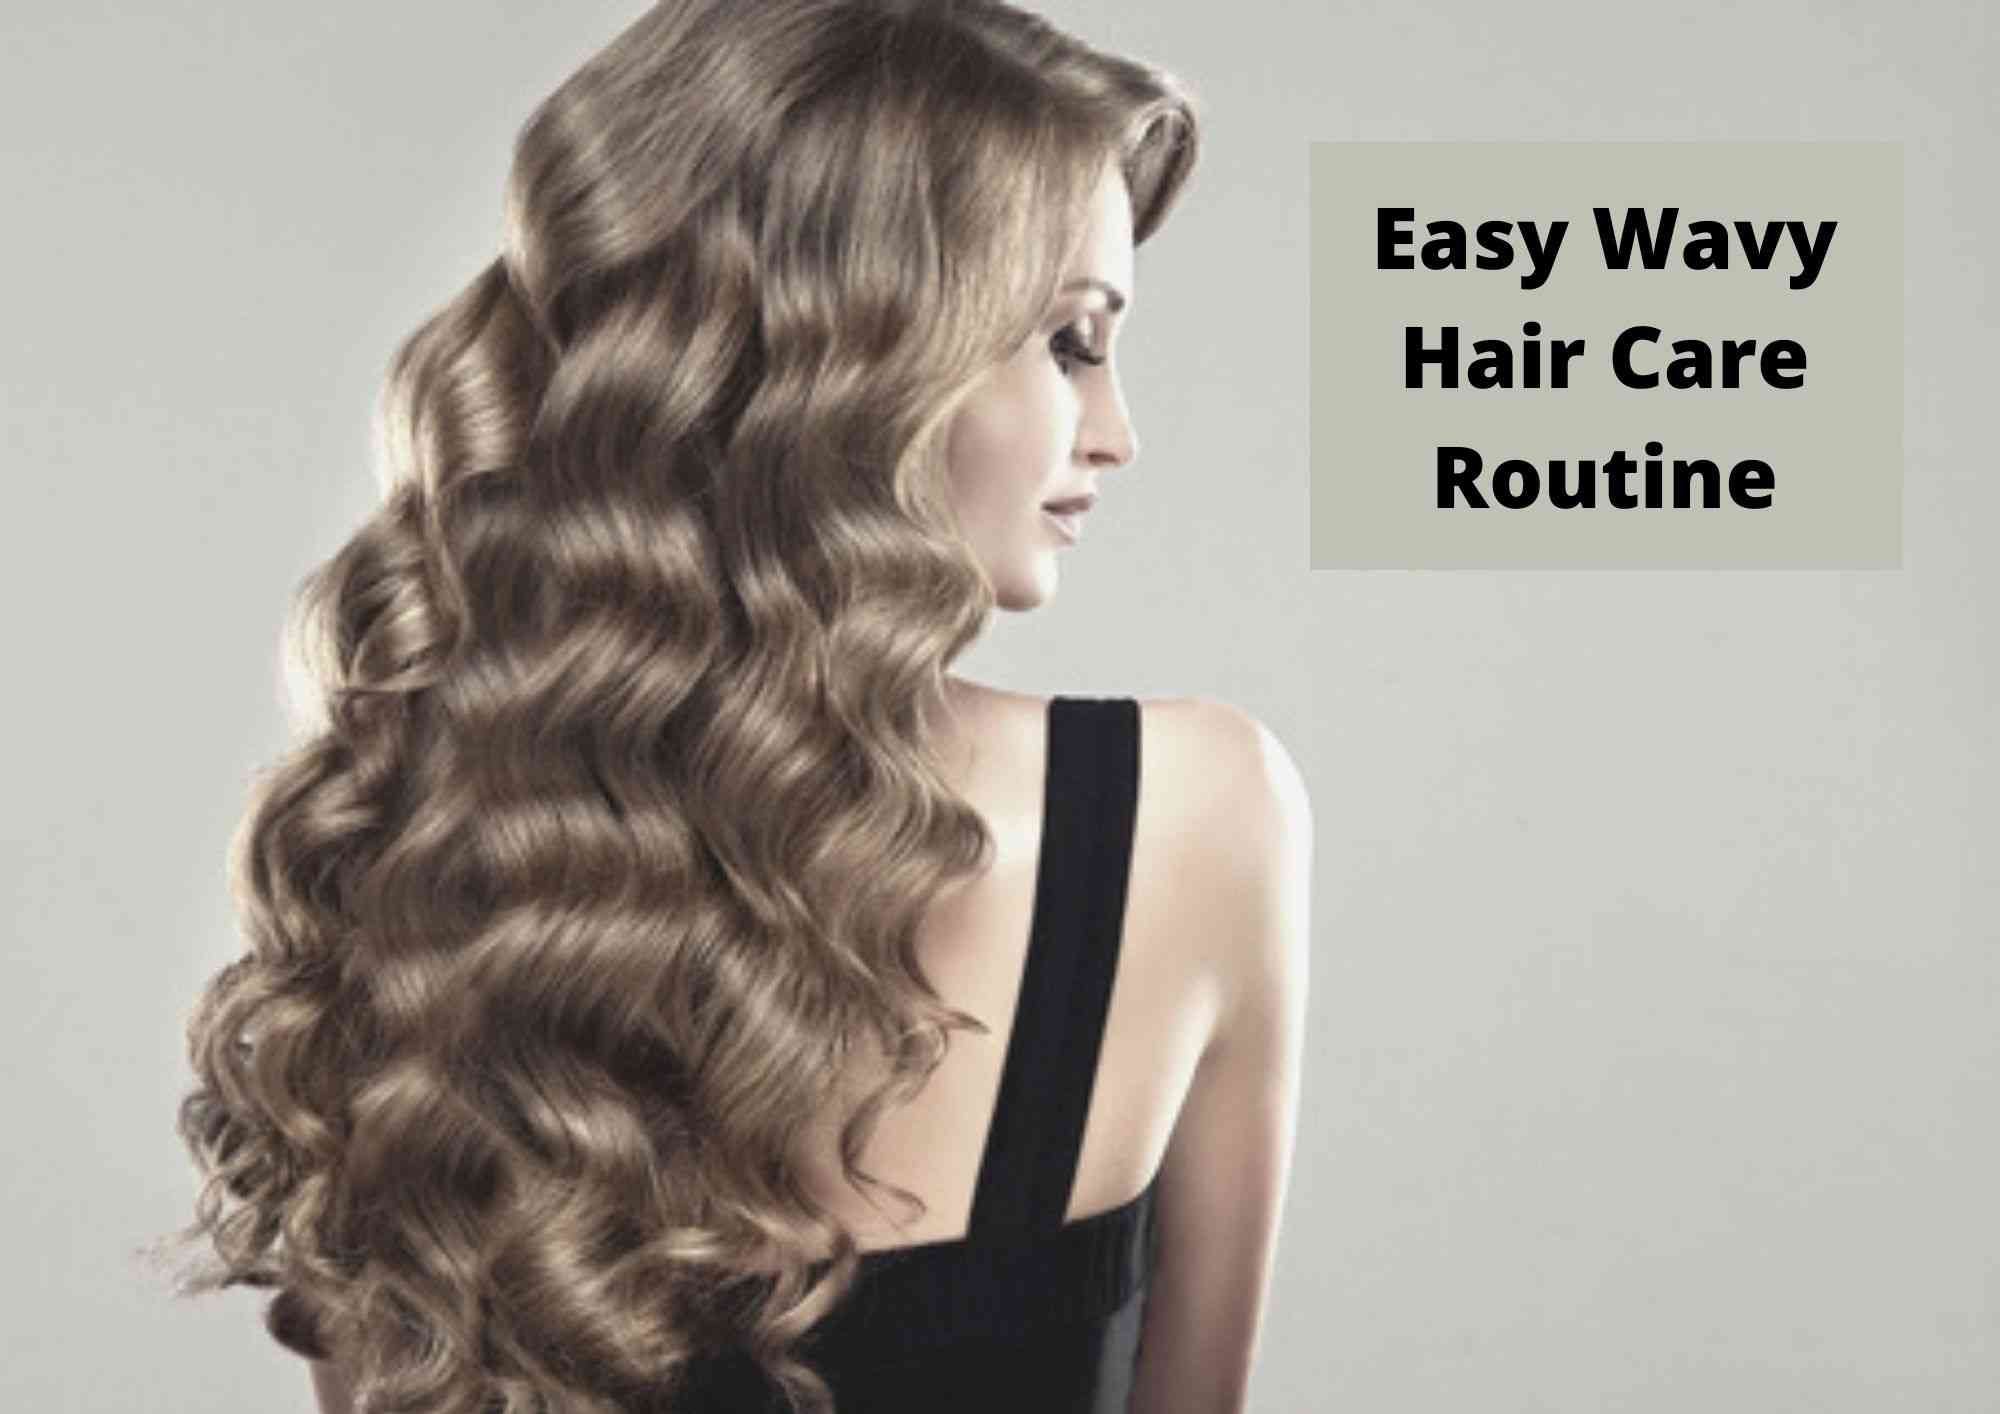 Everyday Hair Routine For Wavy Hair 2023 | How To Care For Wavy Hair In 5  Simple Steps - Hair Everyday Review